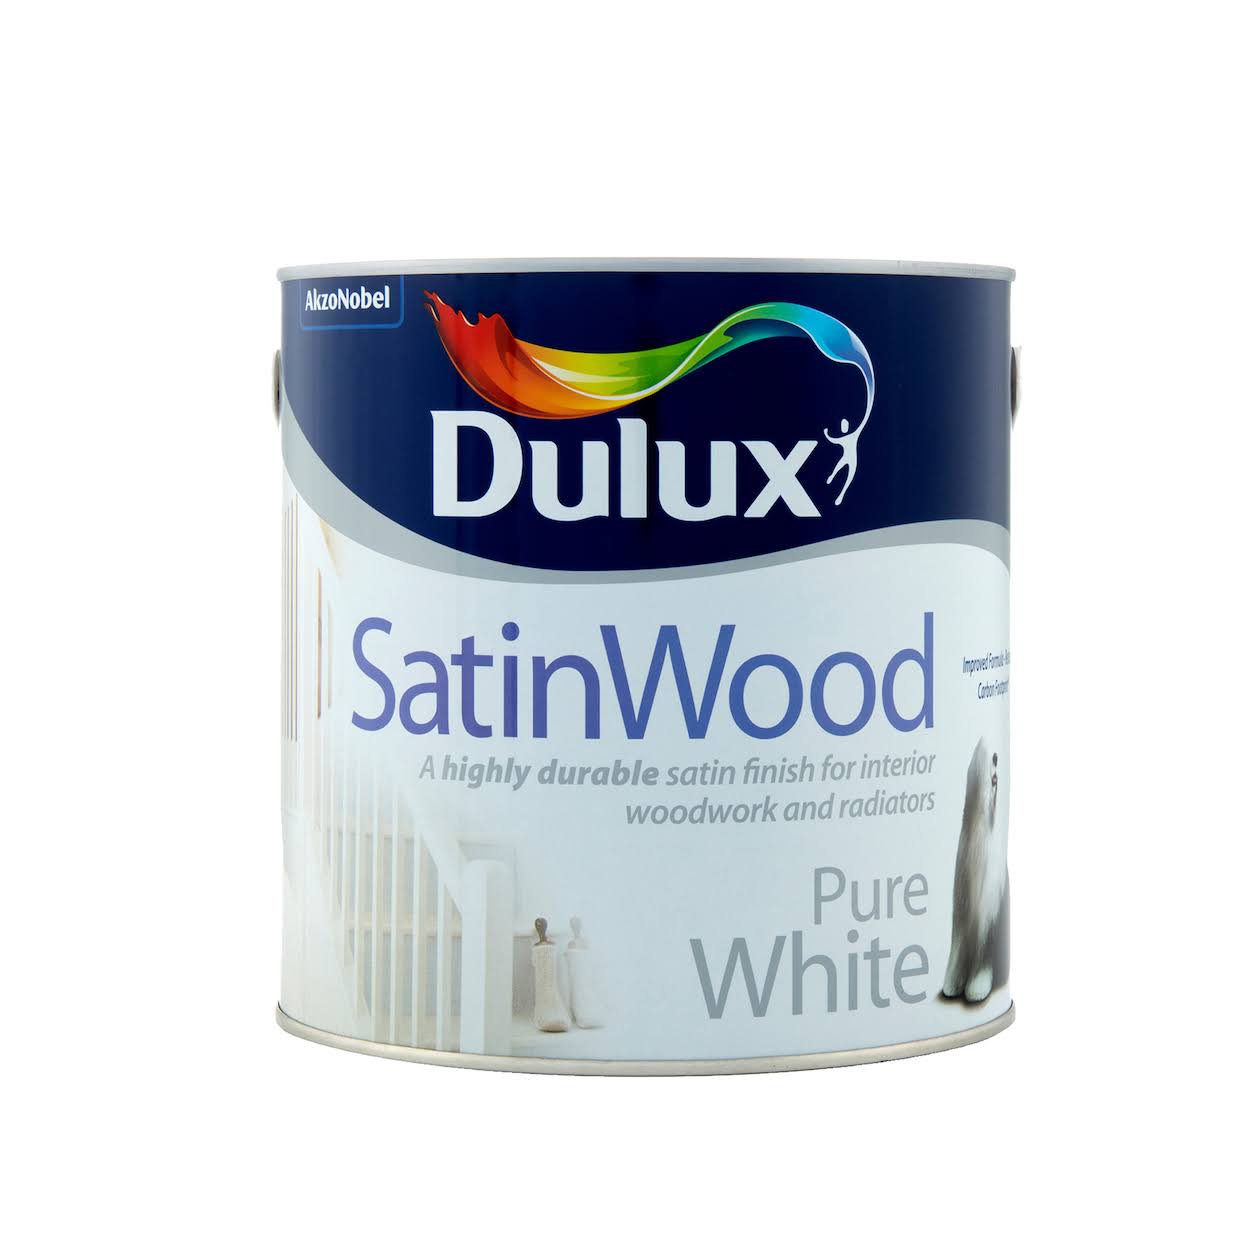 Dulux SatinWood Paint - Pure White